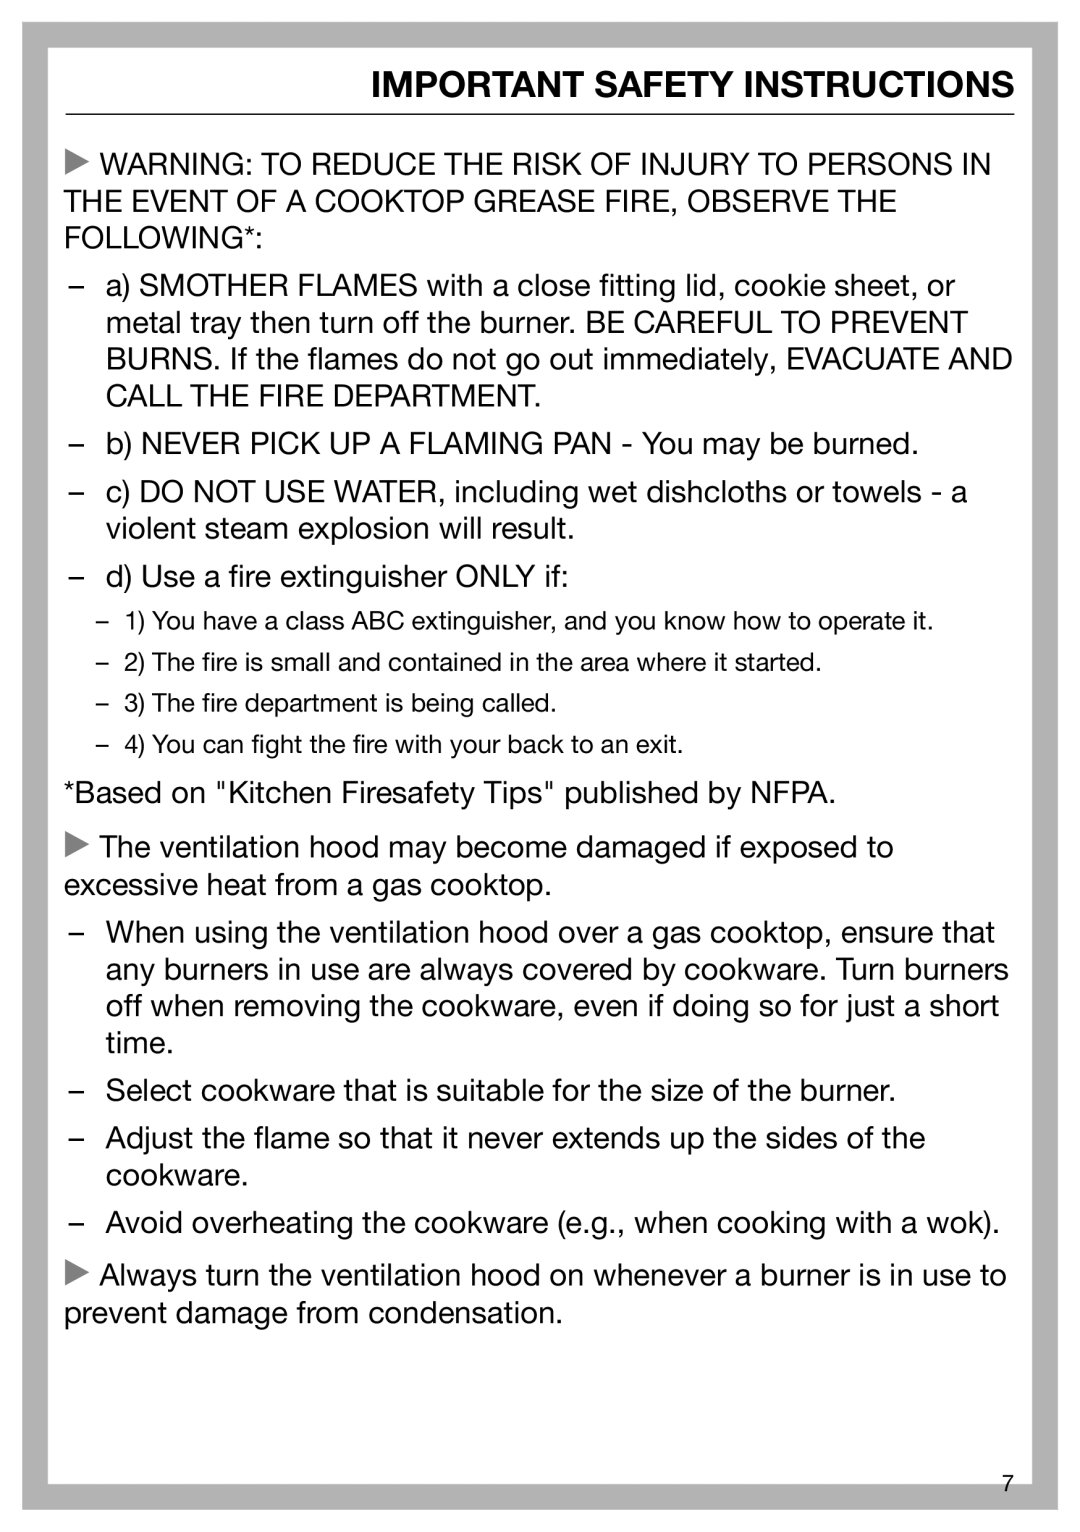 Miele 09 968 280 installation instructions Important Safety Instructions, b NEVER PICK UP A FLAMING PAN - You may be burned 